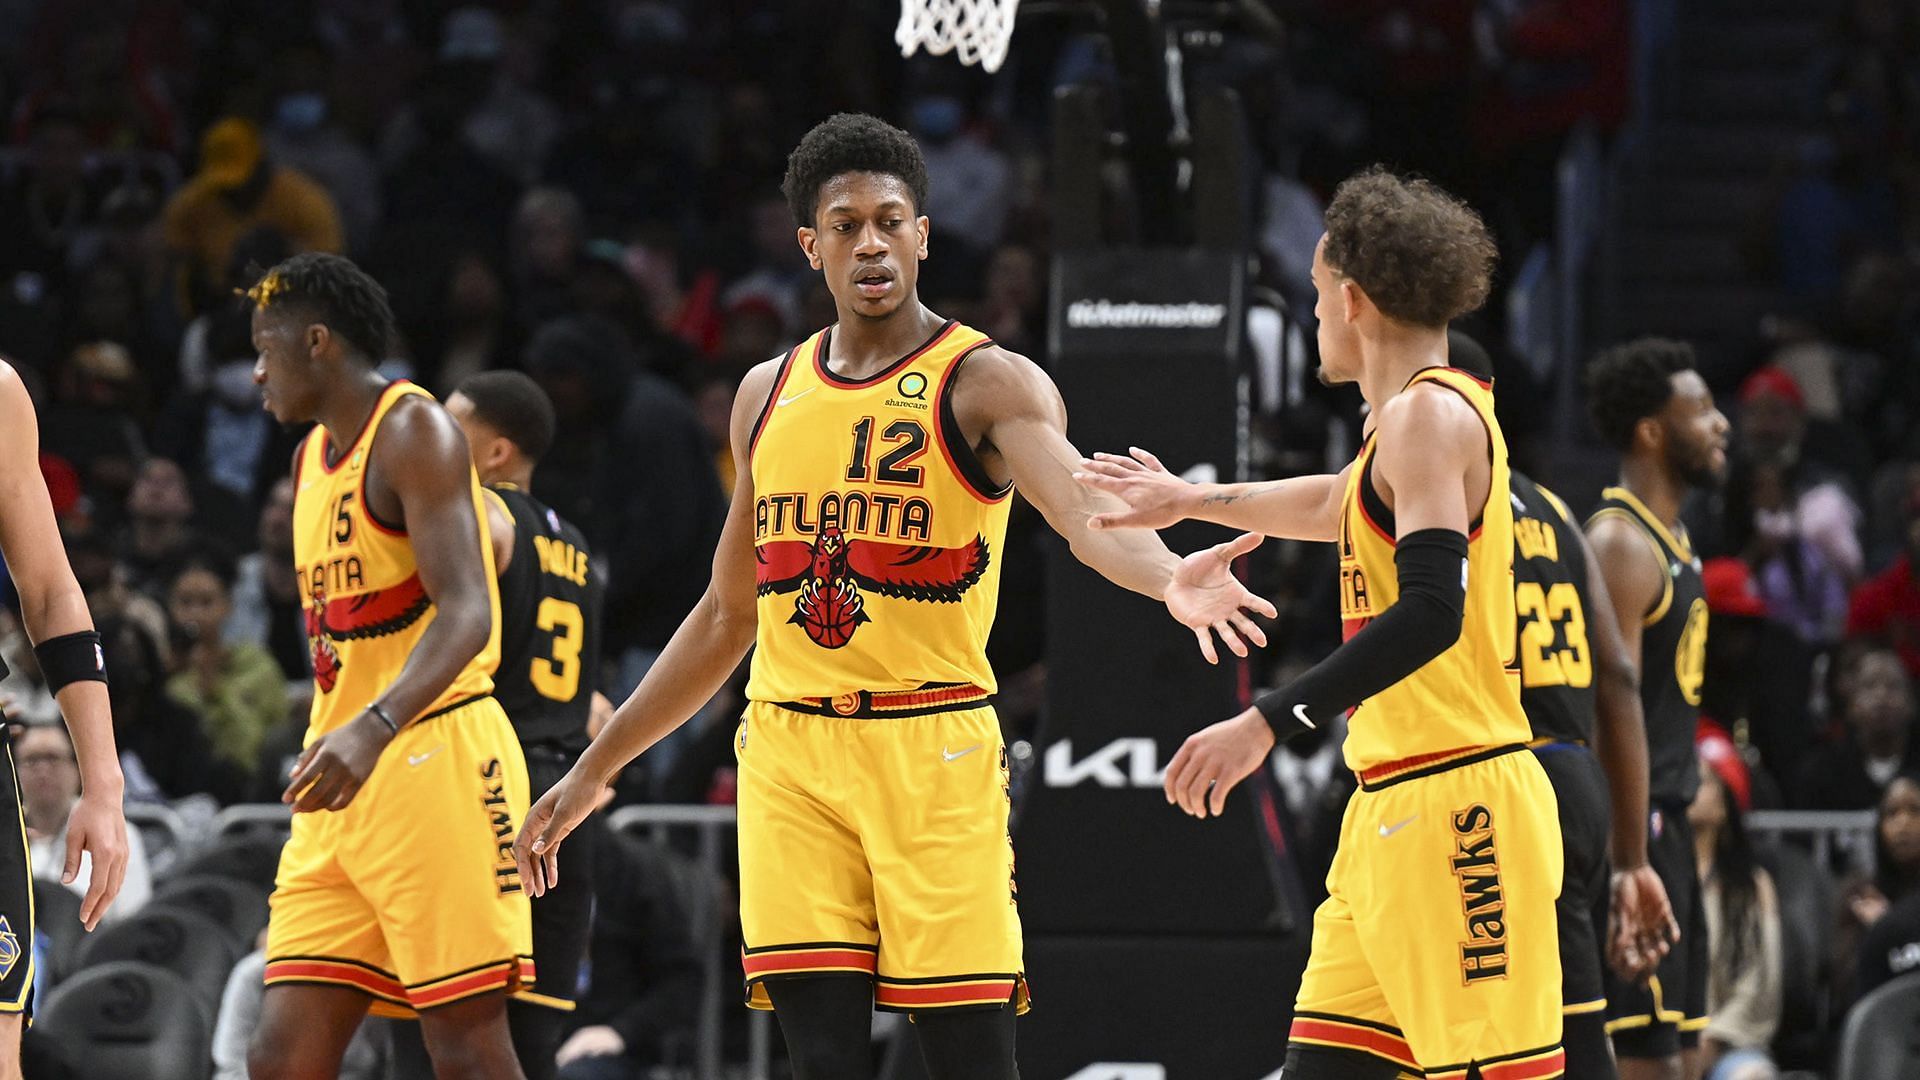 The Atlanta Hawks were firing on all cylinders in their win over the Charlotte Hornets. [Photo: NBA.com]